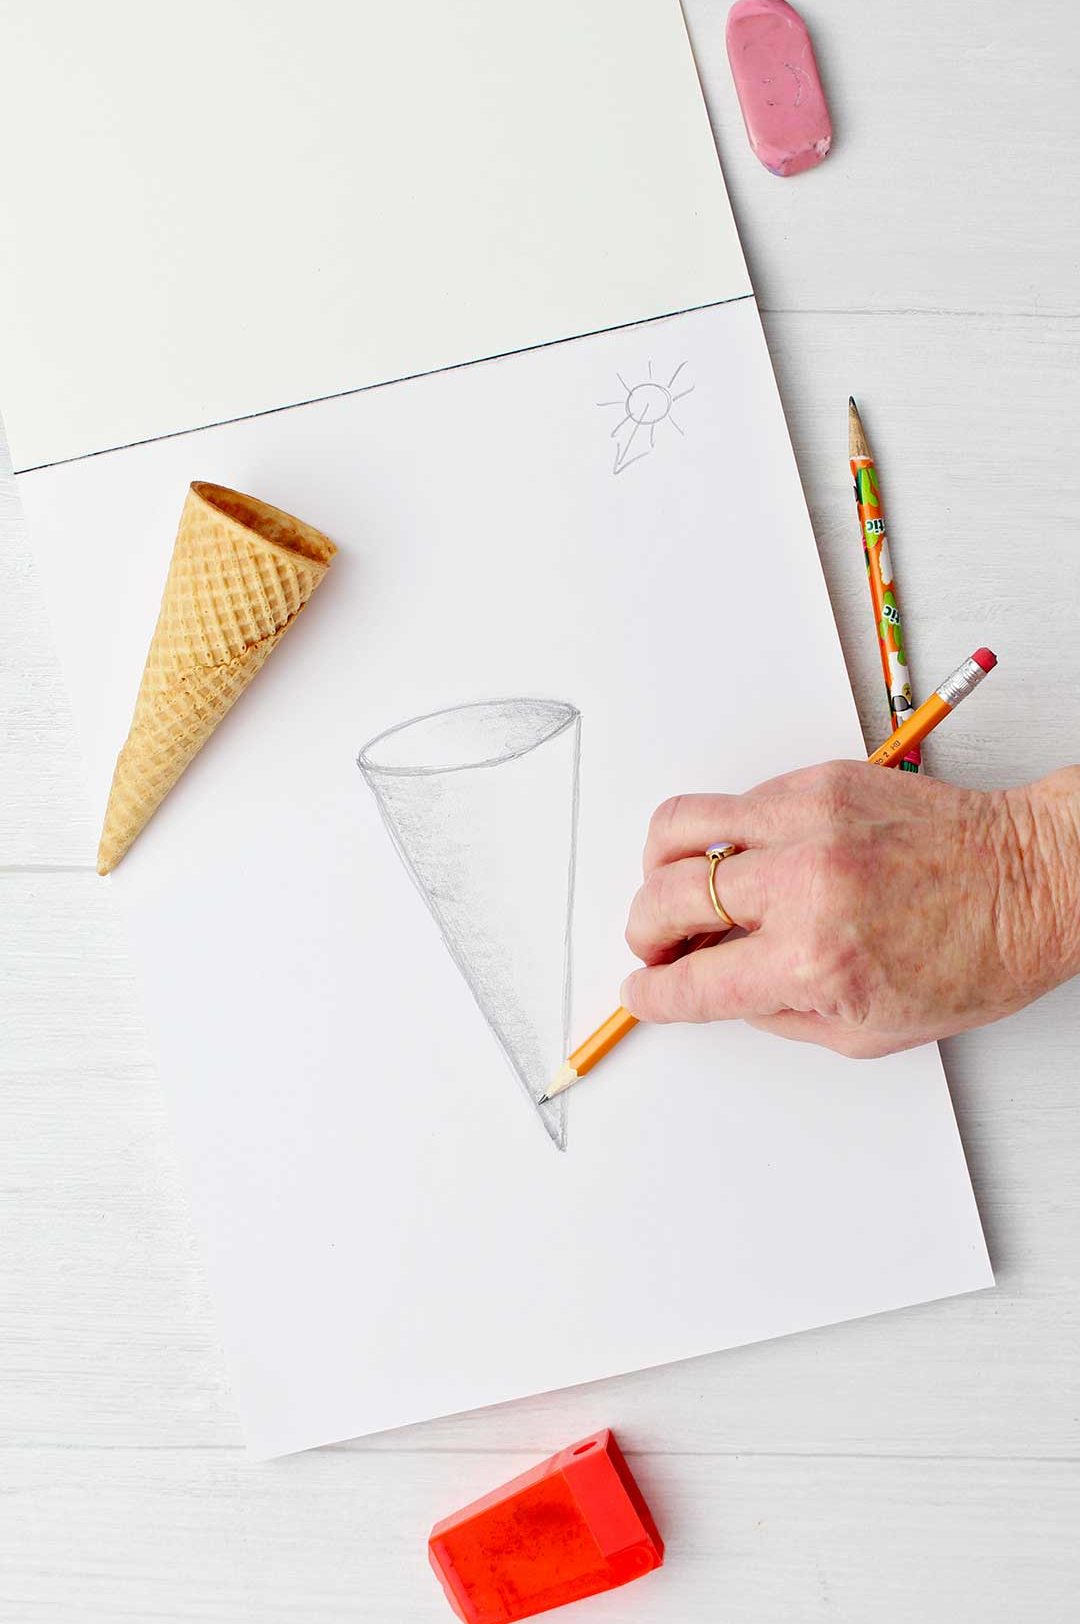 Hand shading the a sketch of a cone with an ice cream cone resting on paper.